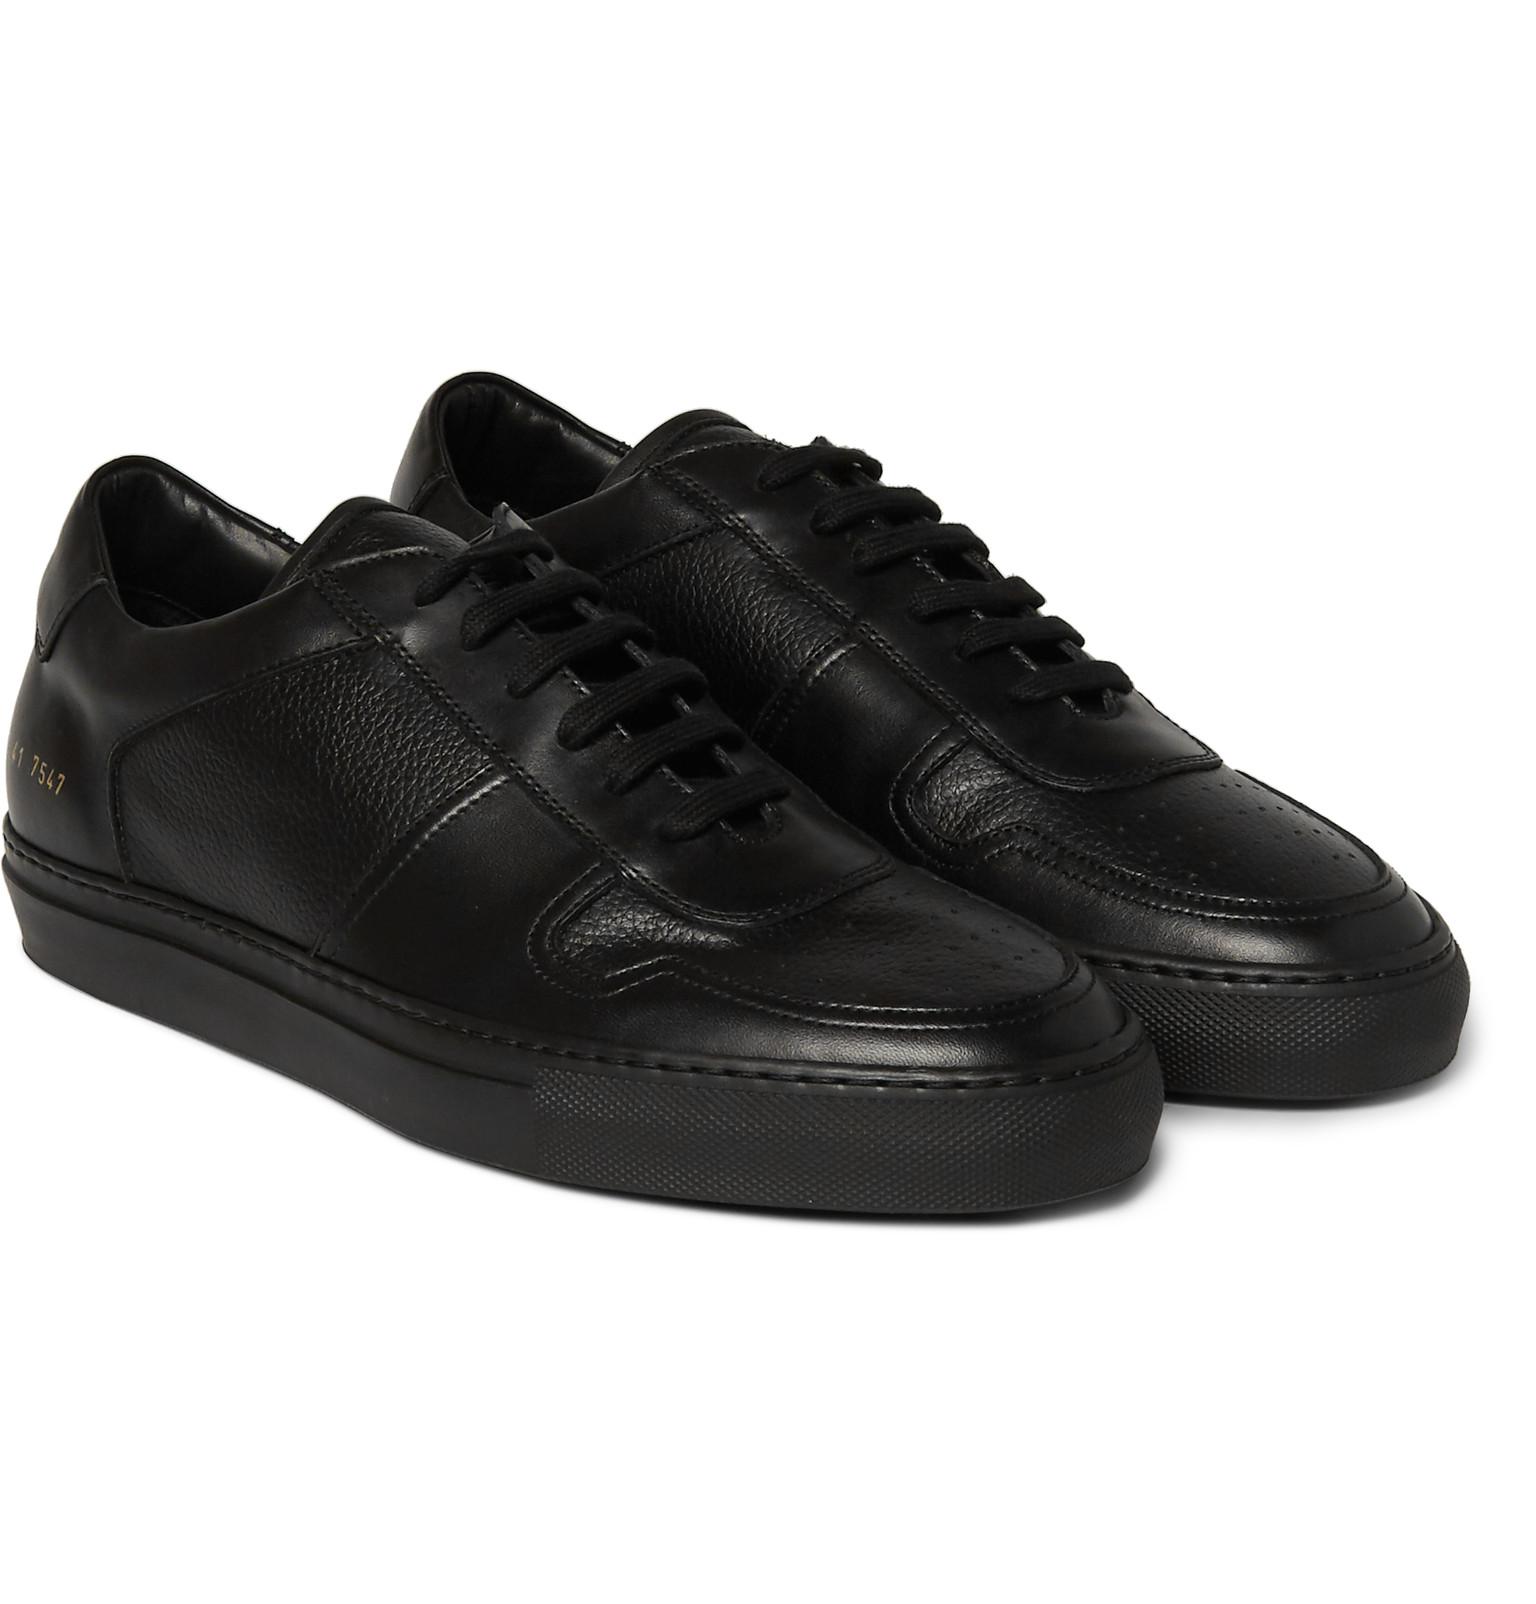 Lyst - Common Projects Bball Leather Sneakers in Black for Men